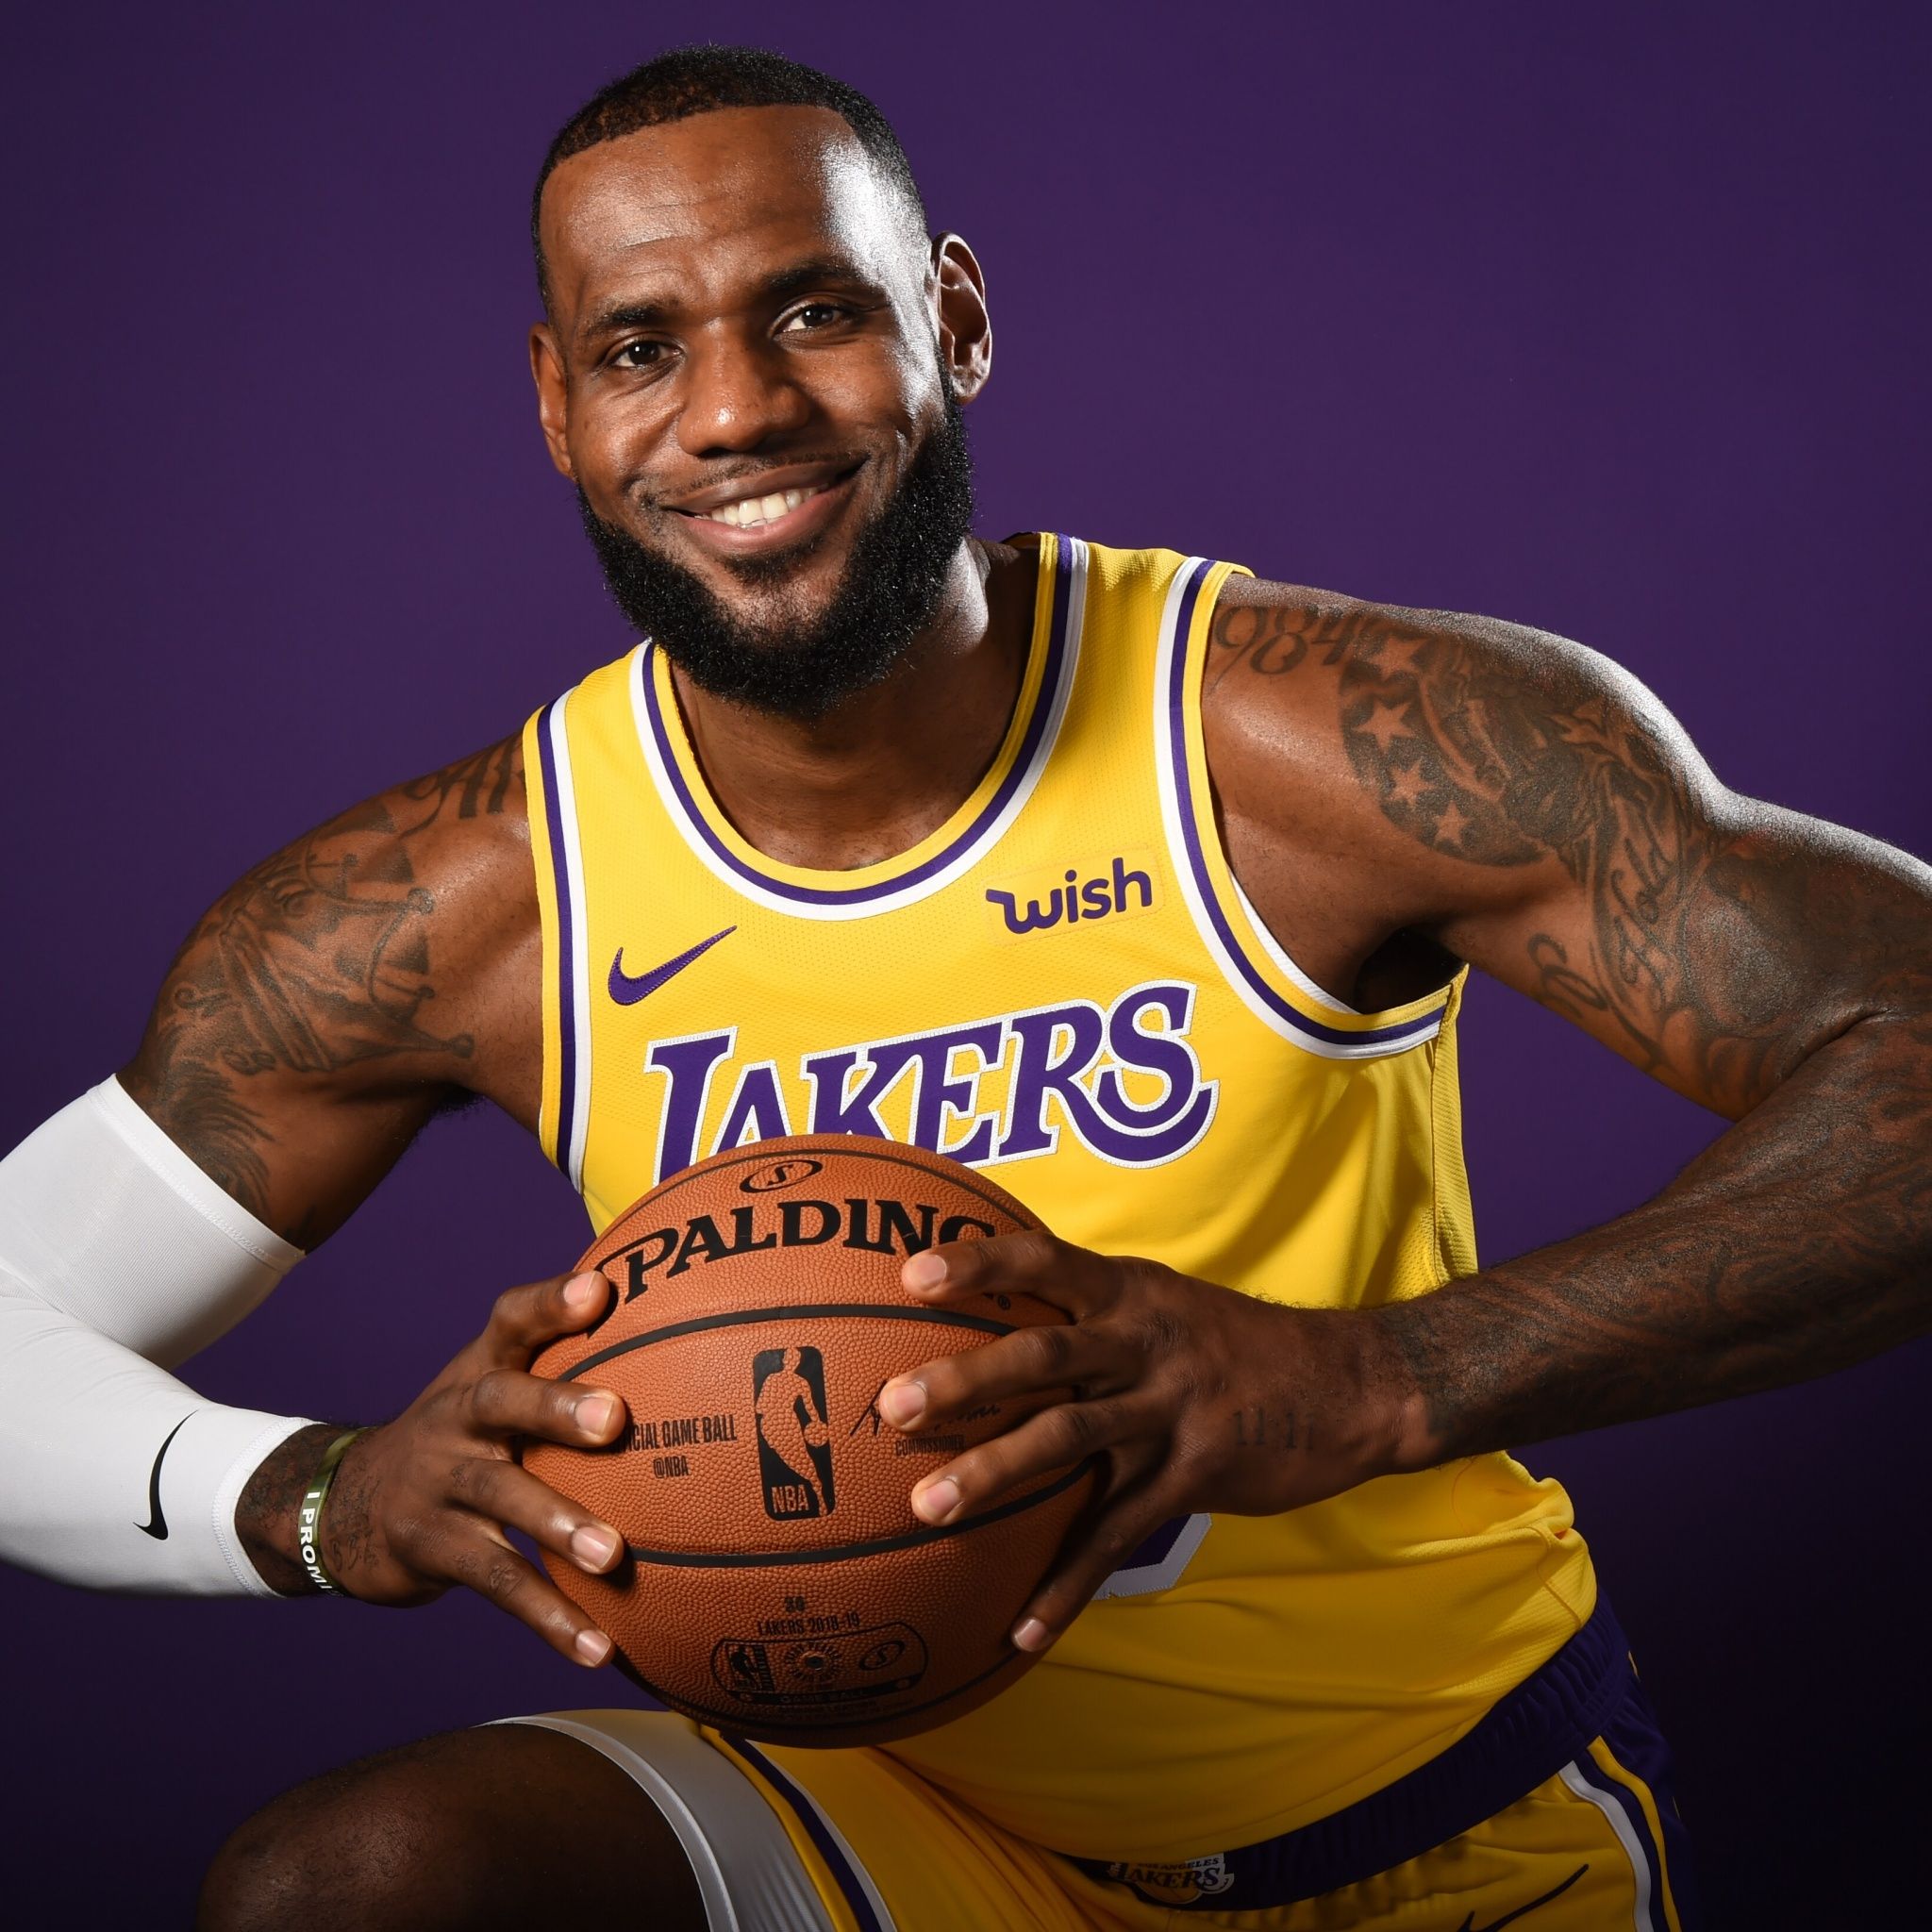 LeBron James poses for a photo in his Lakers jersey. - Los Angeles Lakers, Lebron James